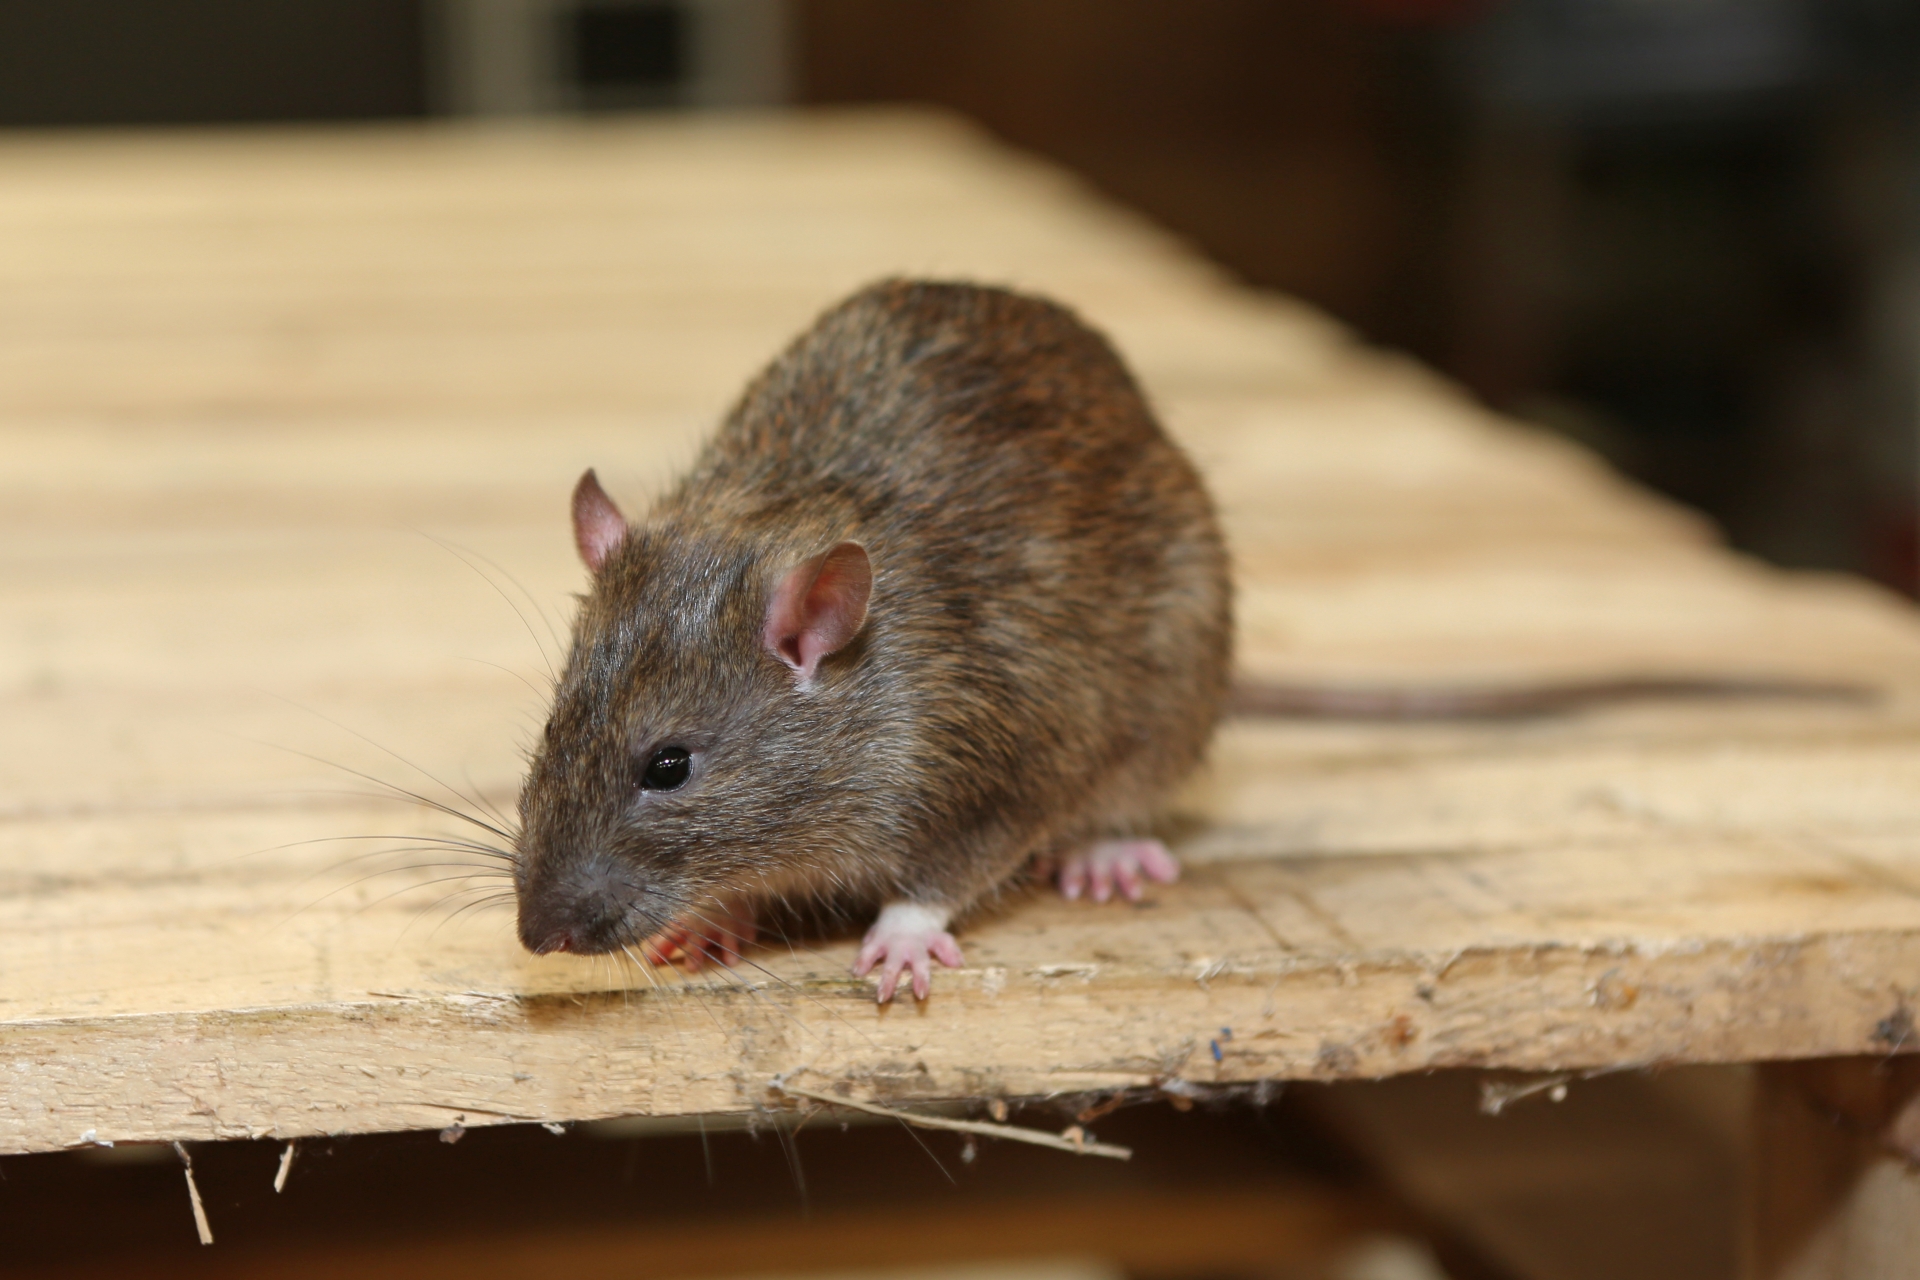 Rat Infestation, Pest Control in Mill Hill, NW7. Call Now 020 8166 9746